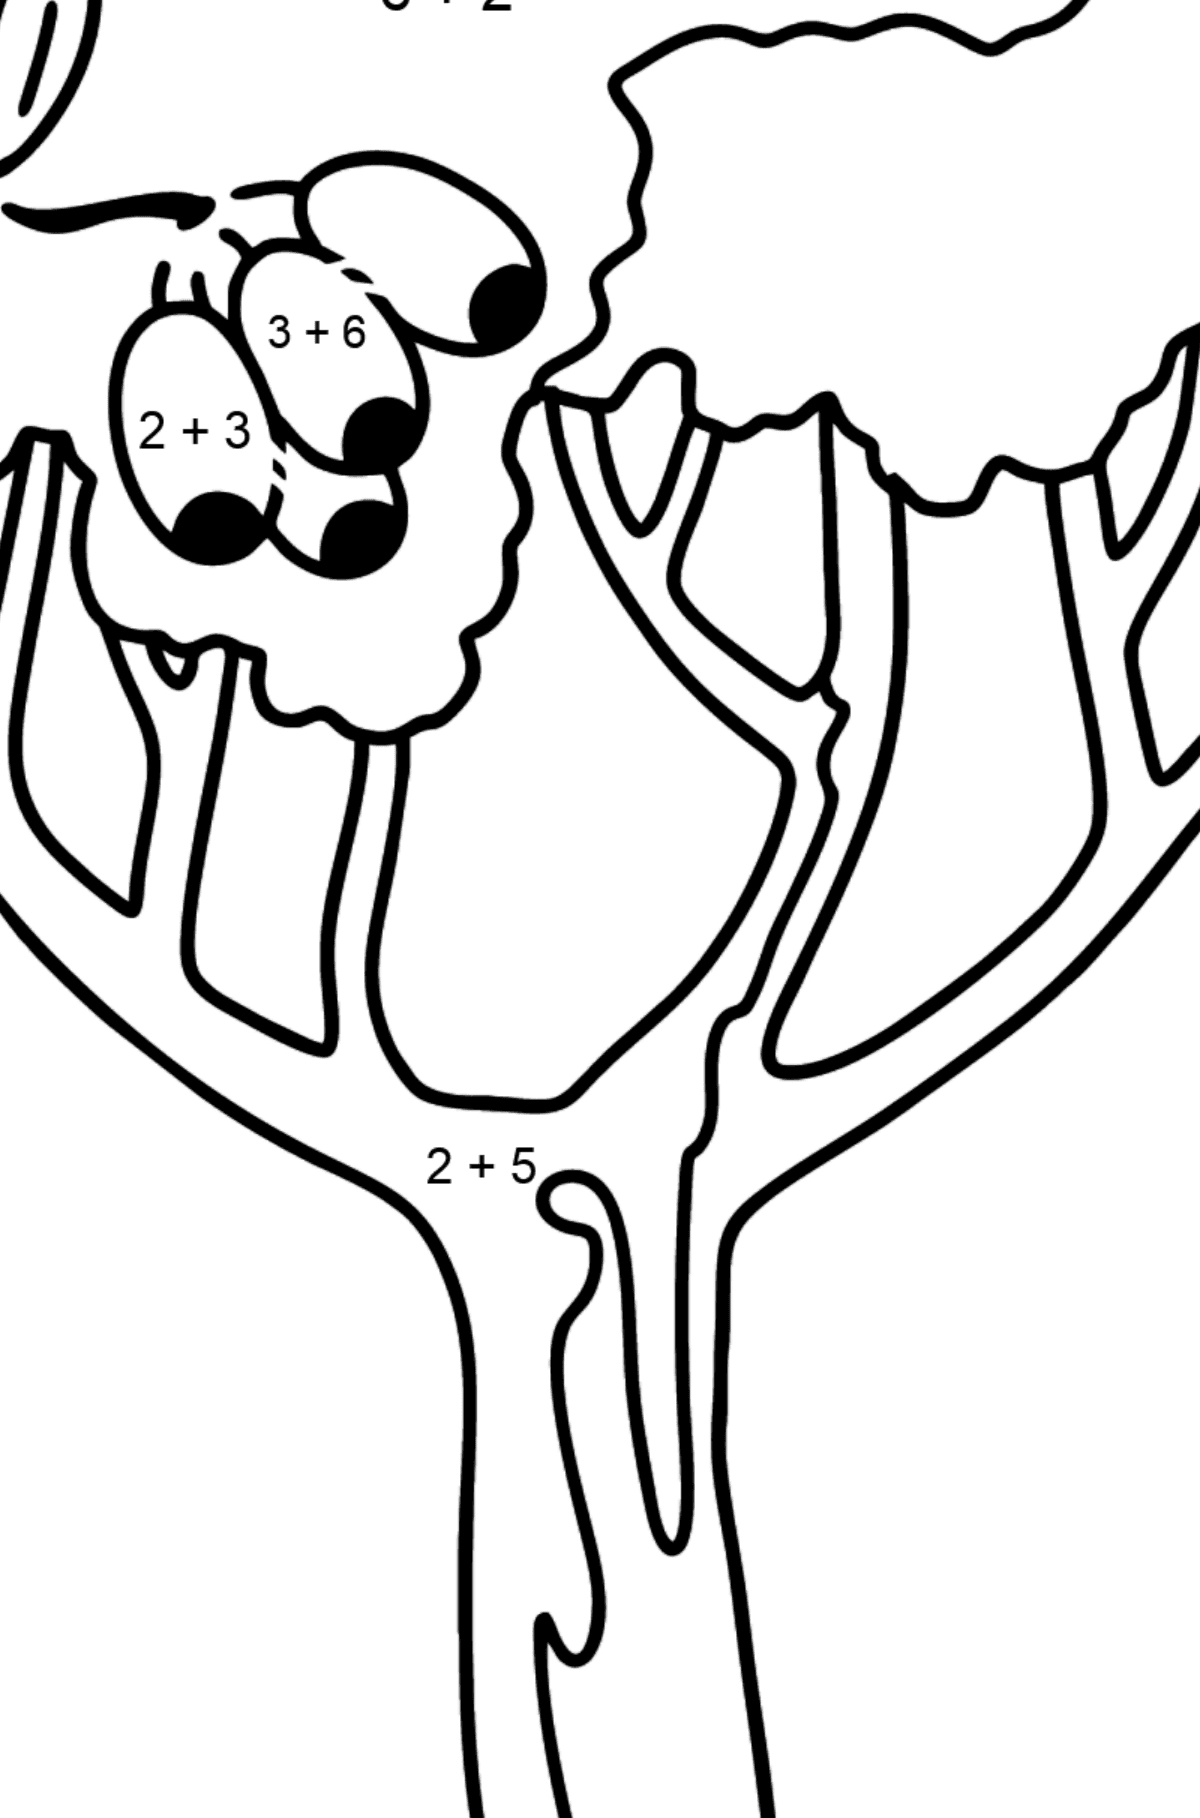 Gum tree - Corimbia coloring page - Math Coloring - Addition for Kids